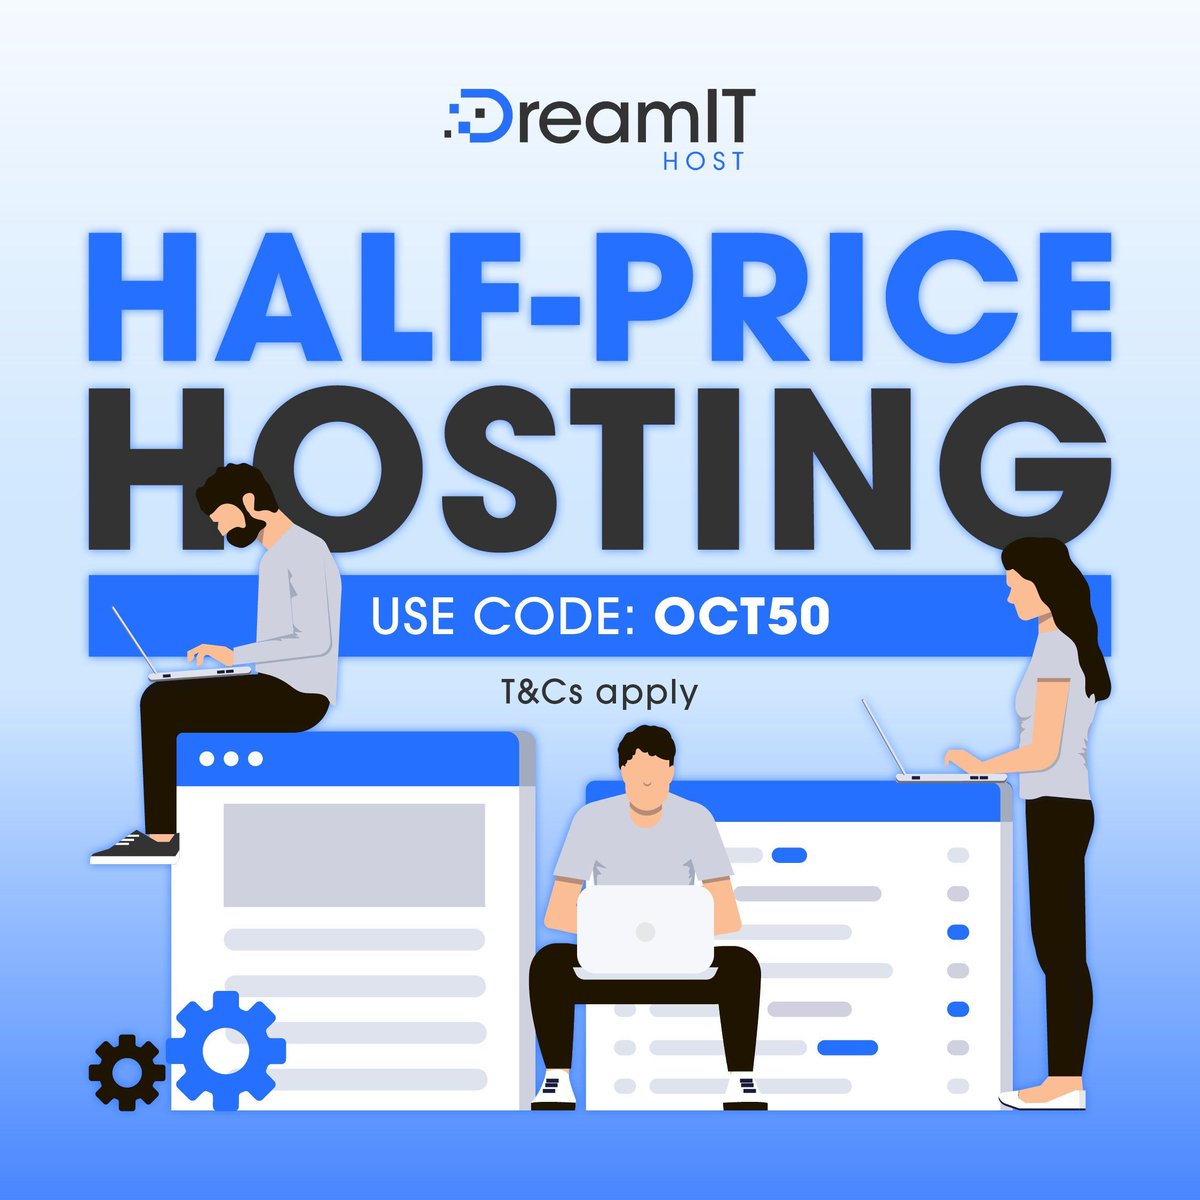 HALF-PRICE HOSTING | Use code 'OCT50' to get 50% OFF your first invoice on new or additional Web, Email, Premier, Reseller Web, Reseller Email, VPS and CDN hosting services! T&Cs apply.
-
#dreamithost #australian #webhosting #emailhosting #resellerhosting #cdn #vps